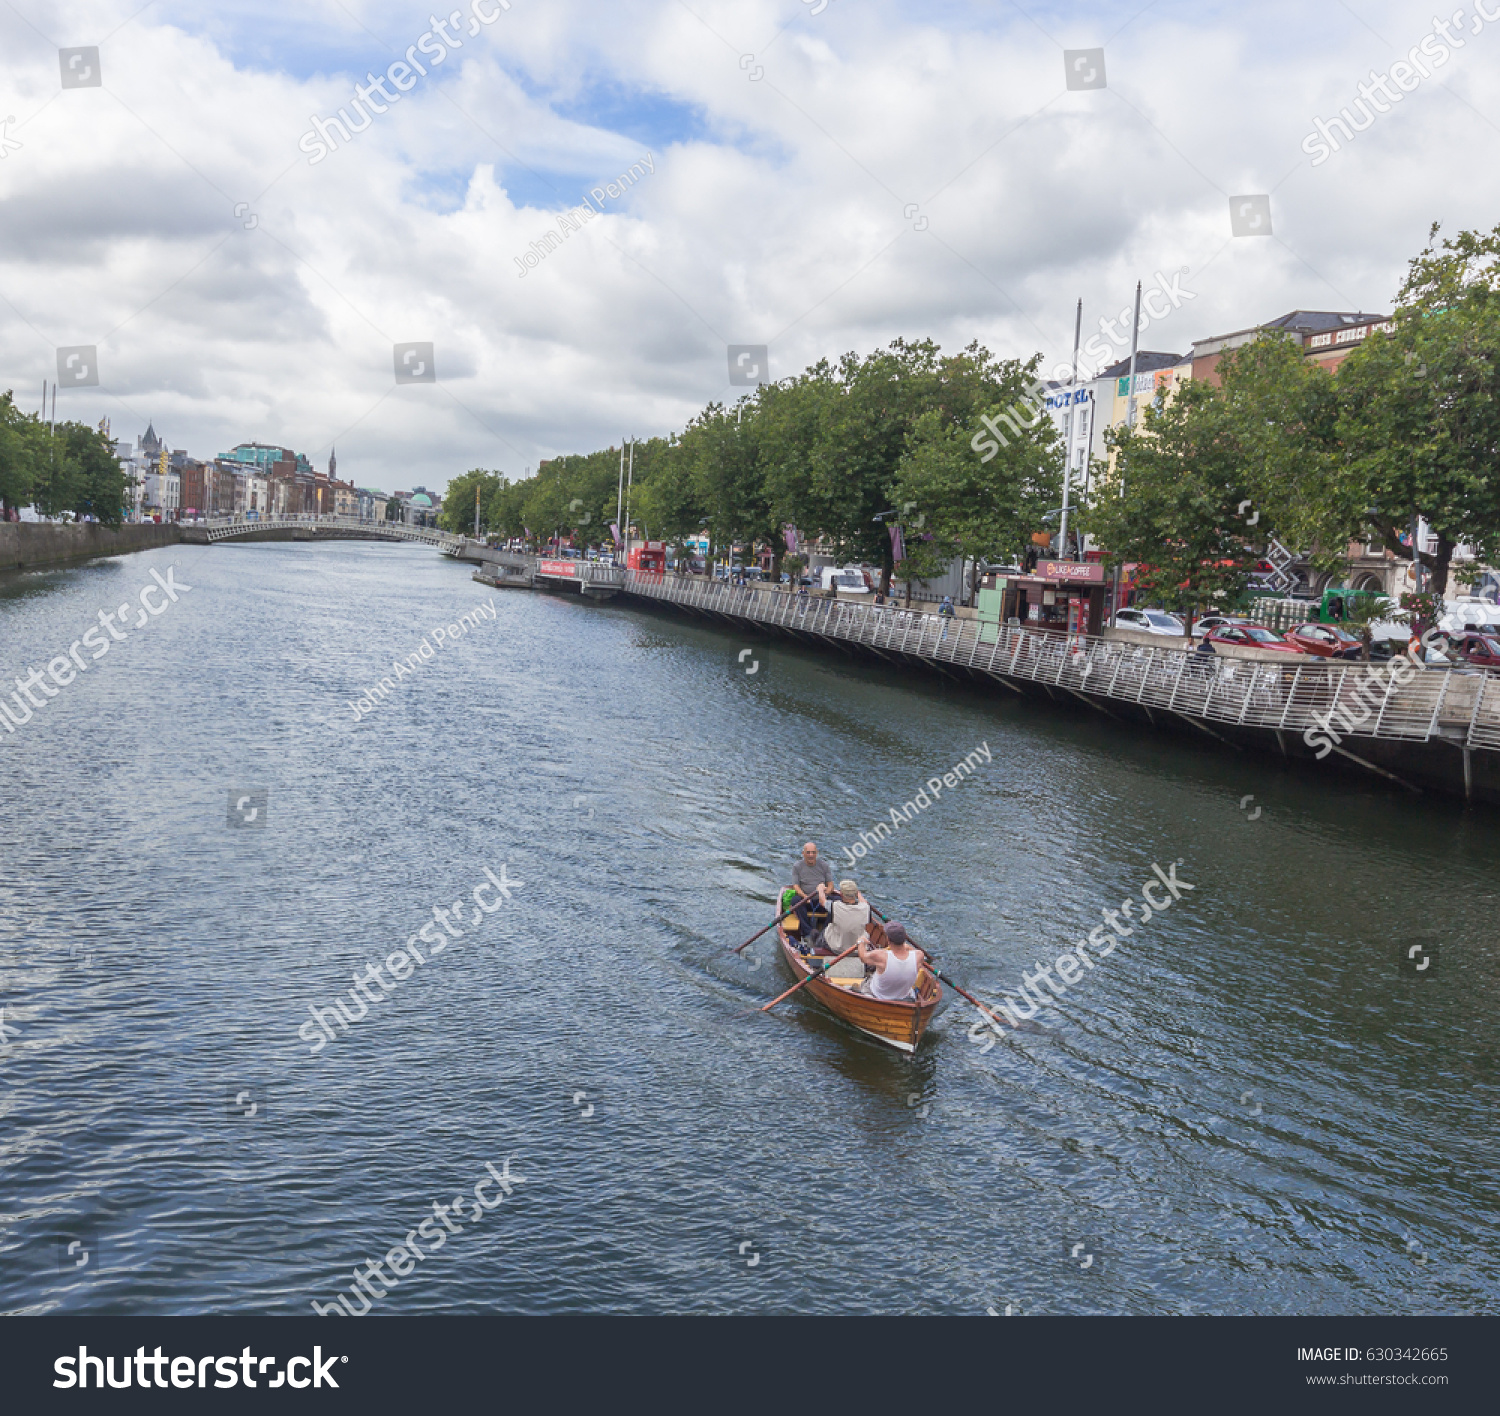 Editorial Use Only Three Men Rowing Stock Photo 630342665 - Shutterstock